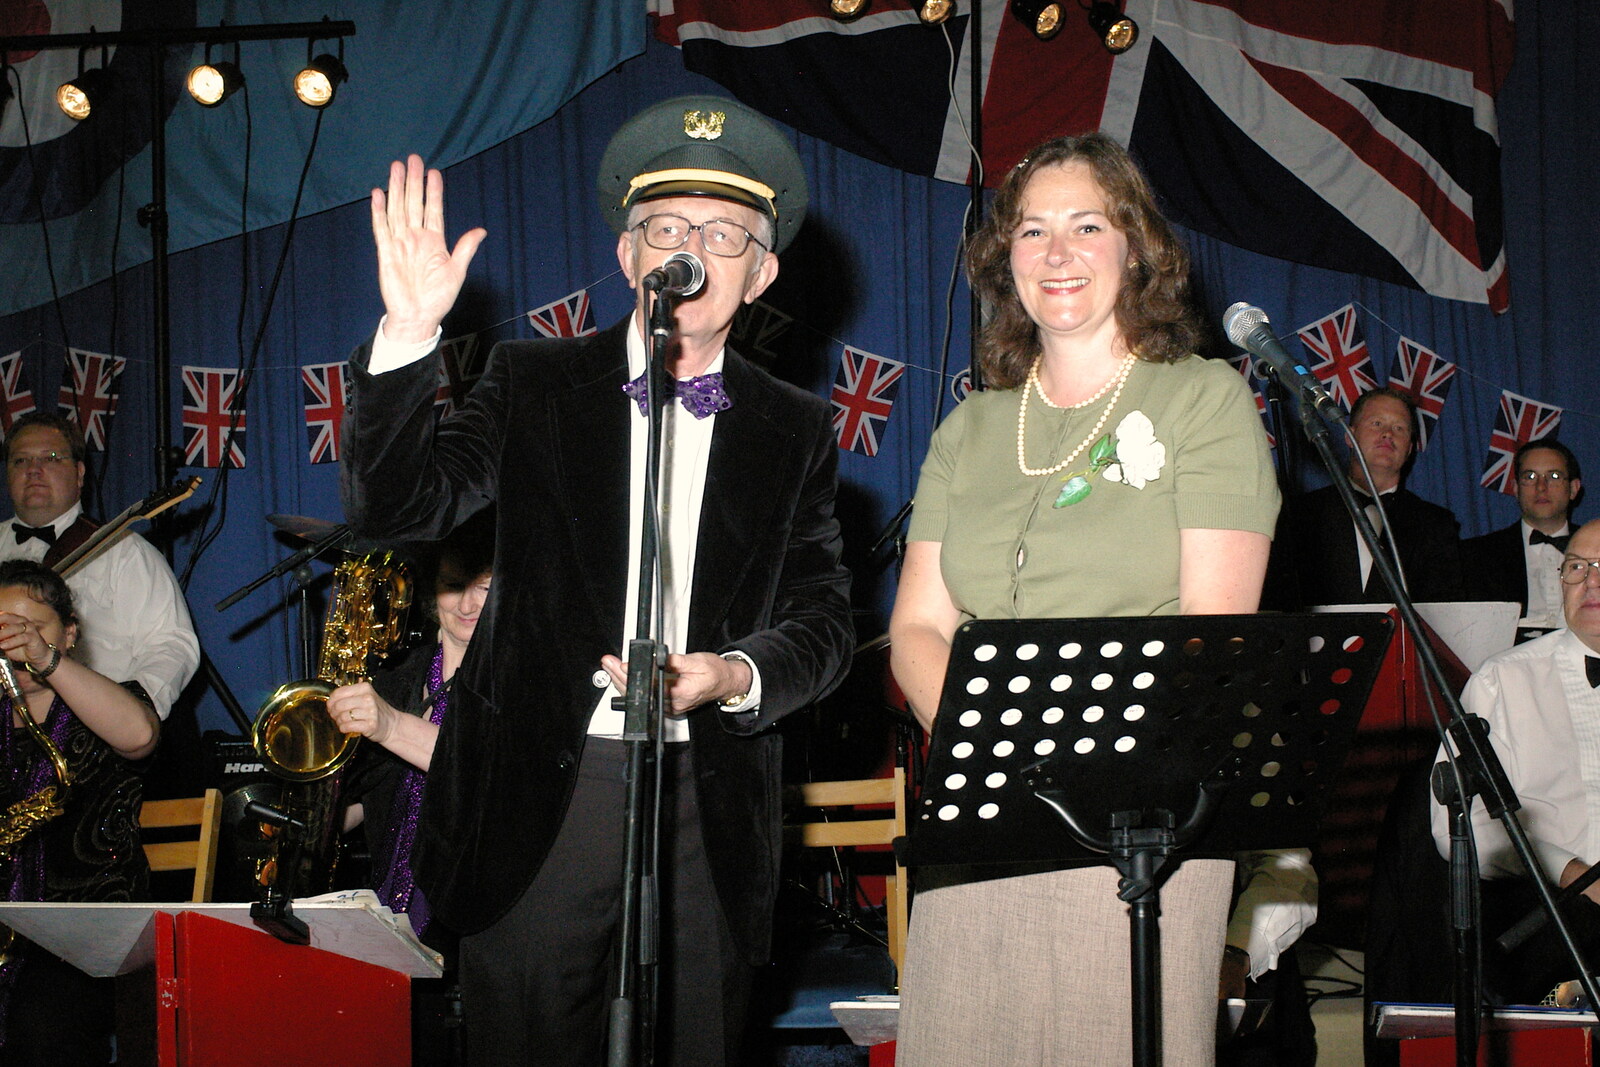 A raffle is announced from Another 1940s Dance, Ellough Airfield, Beccles, Suffolk - 24th June 2005